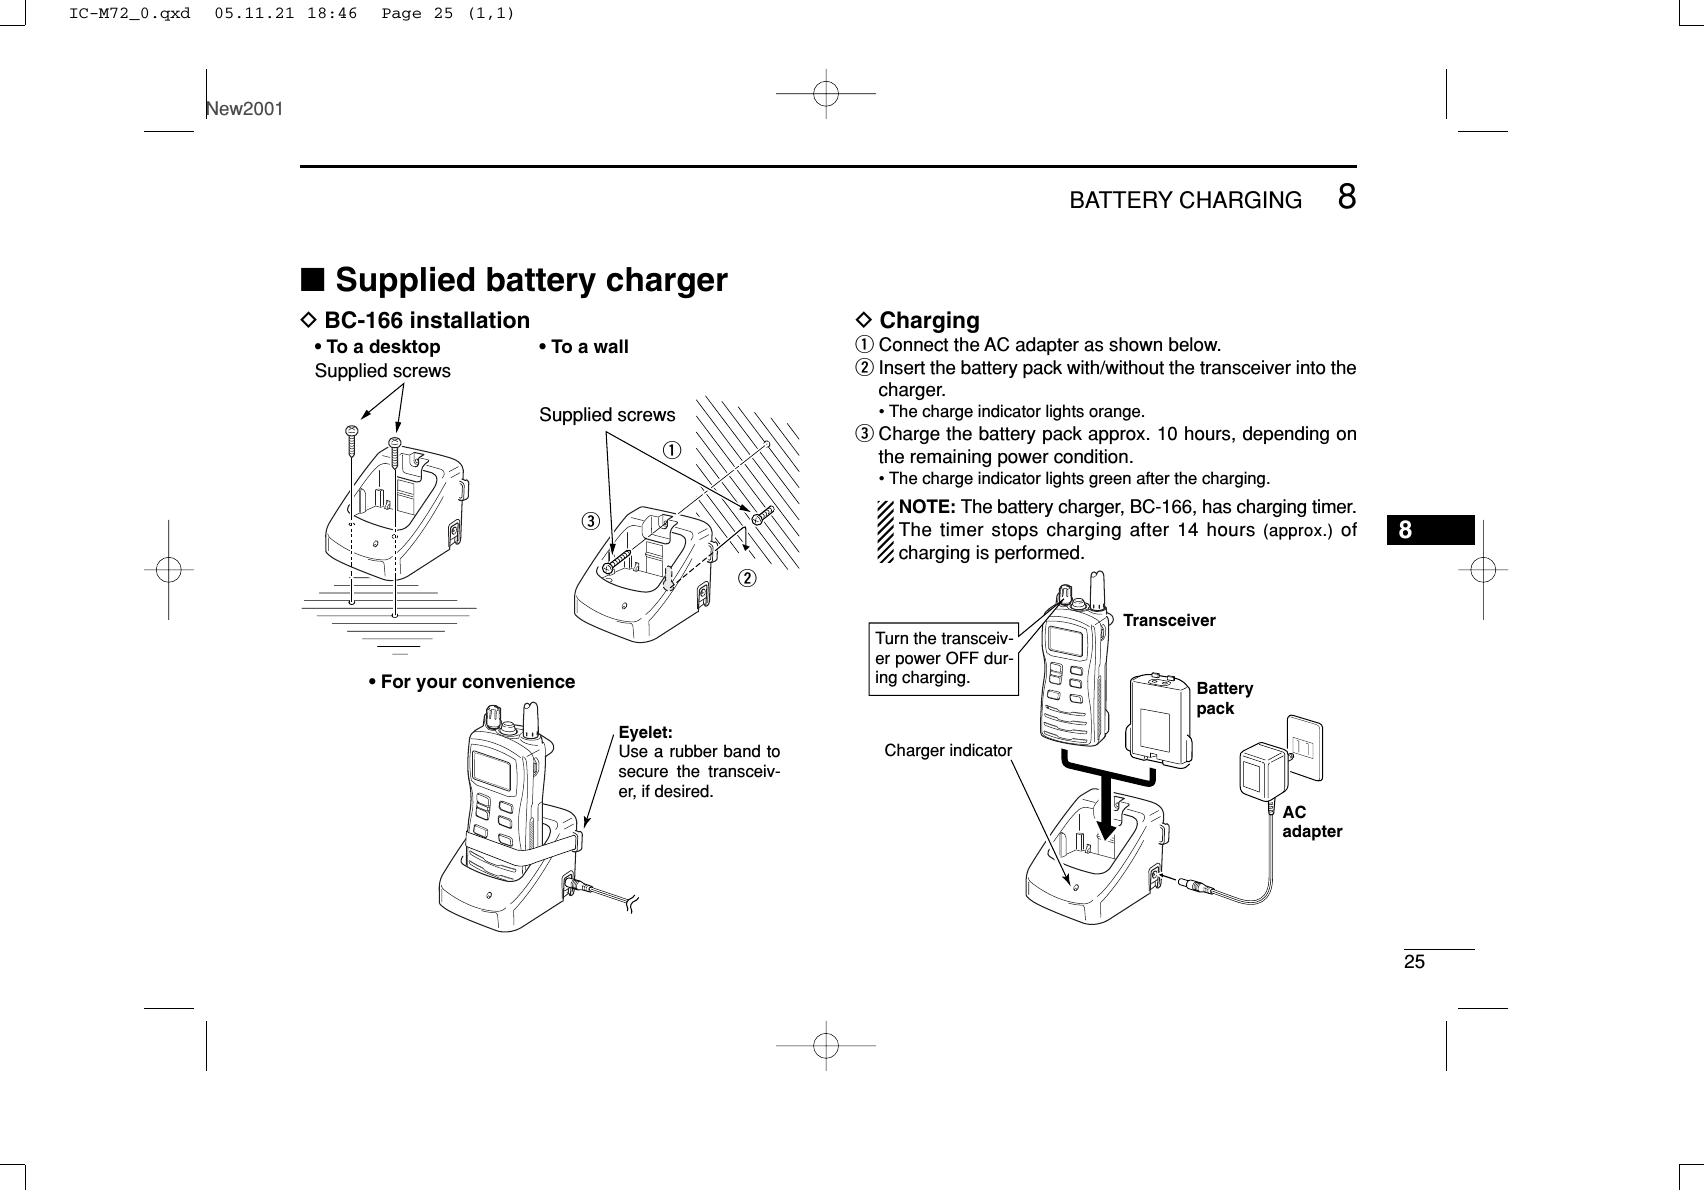 258BATTERY CHARGINGNew20018■Supplied battery chargerDBC-166 installation DChargingqConnect the AC adapter as shown below.wInsert the battery pack with/without the transceiver into thecharger.• The charge indicator lights orange.eCharge the battery pack approx. 10 hours, depending onthe remaining power condition.• The charge indicator lights green after the charging.NOTE: The battery charger, BC-166, has charging timer.The timer stops charging after 14 hours (approx.) ofcharging is performed.TransceiverBatterypackACadapterTurn the transceiv-er power OFF dur-ing charging.Charger indicatorqweSupplied screwsSupplied screws• To a desktop• For your convenience• To a wallEyelet:Use a rubber band to secure the transceiv-er, if desired.IC-M72_0.qxd  05.11.21 18:46  Page 25 (1,1)